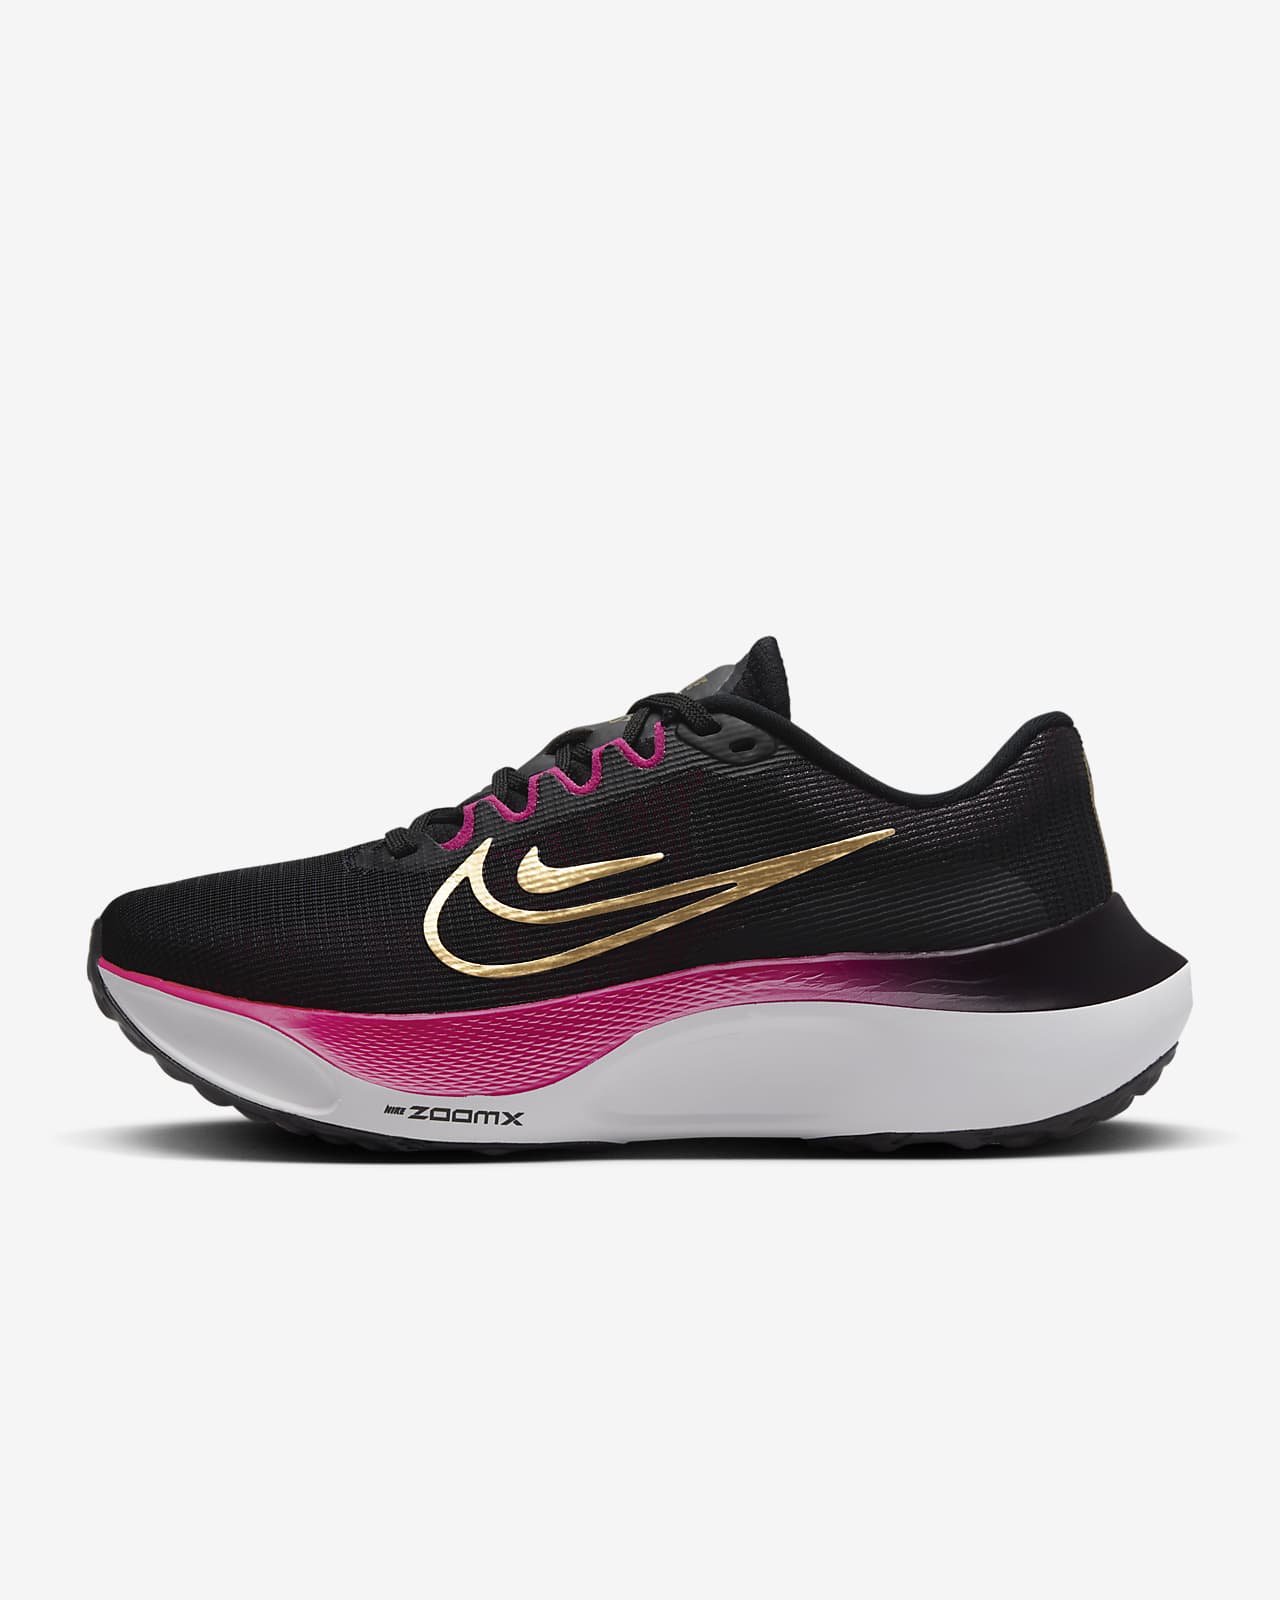 Best Nike Running Shoes Right Now - Believe in the Run